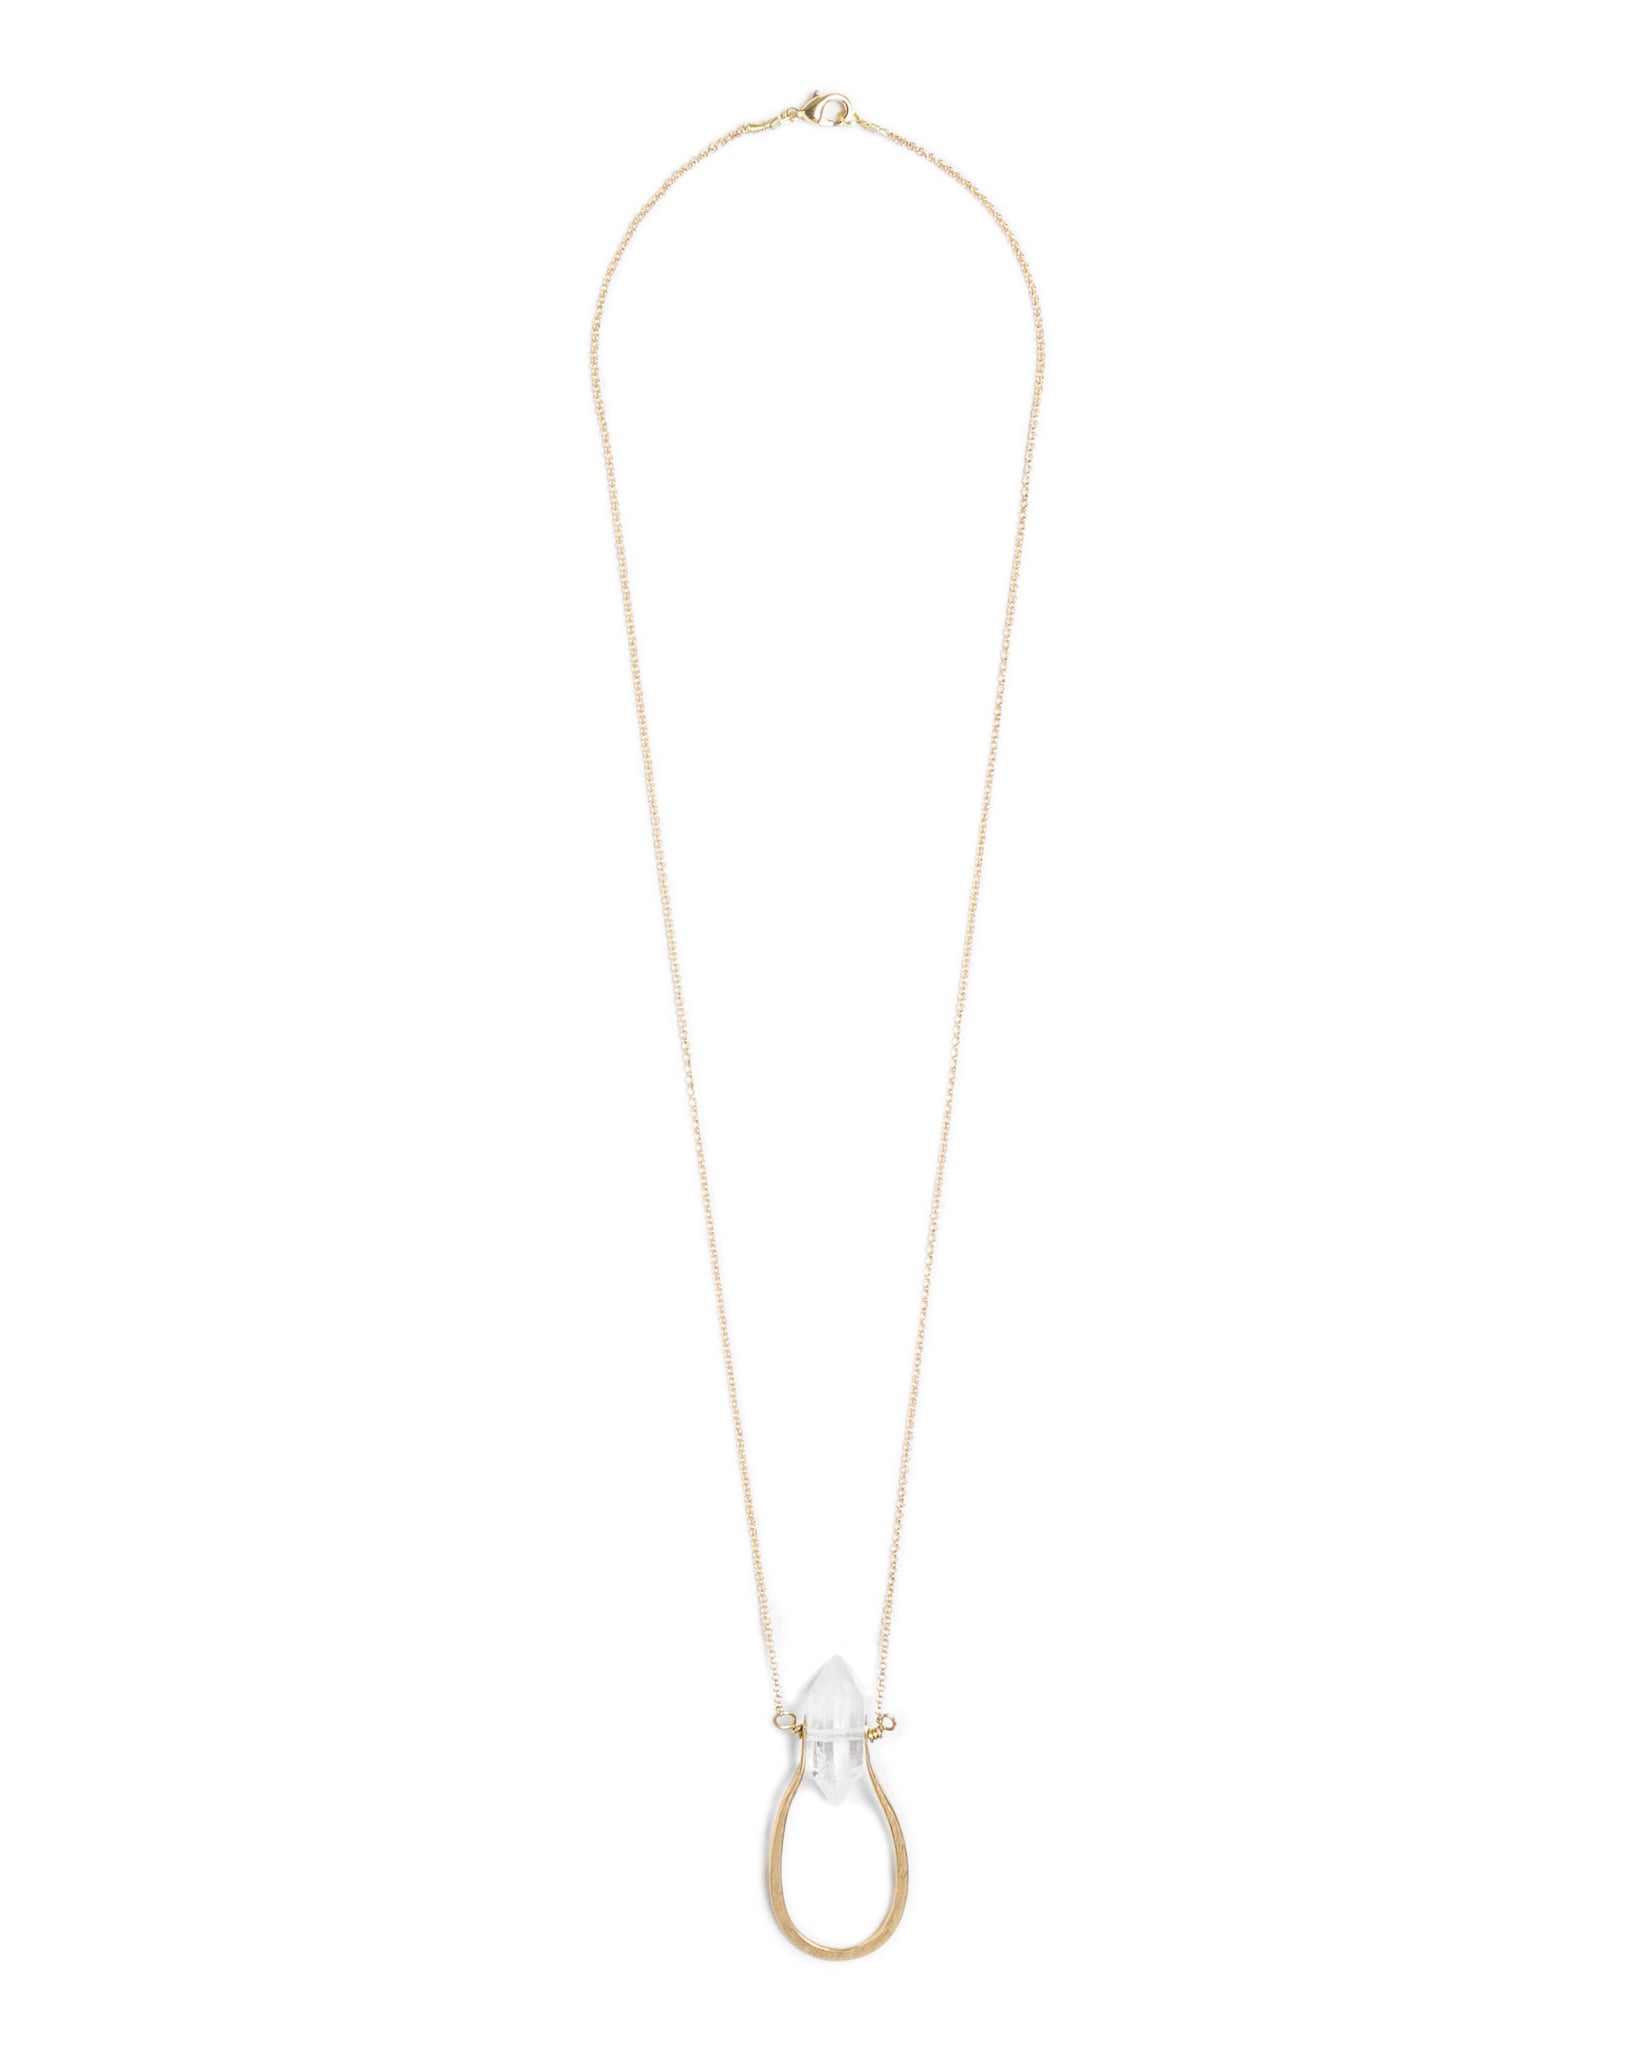 Pinched “U” Crystal Point Necklace